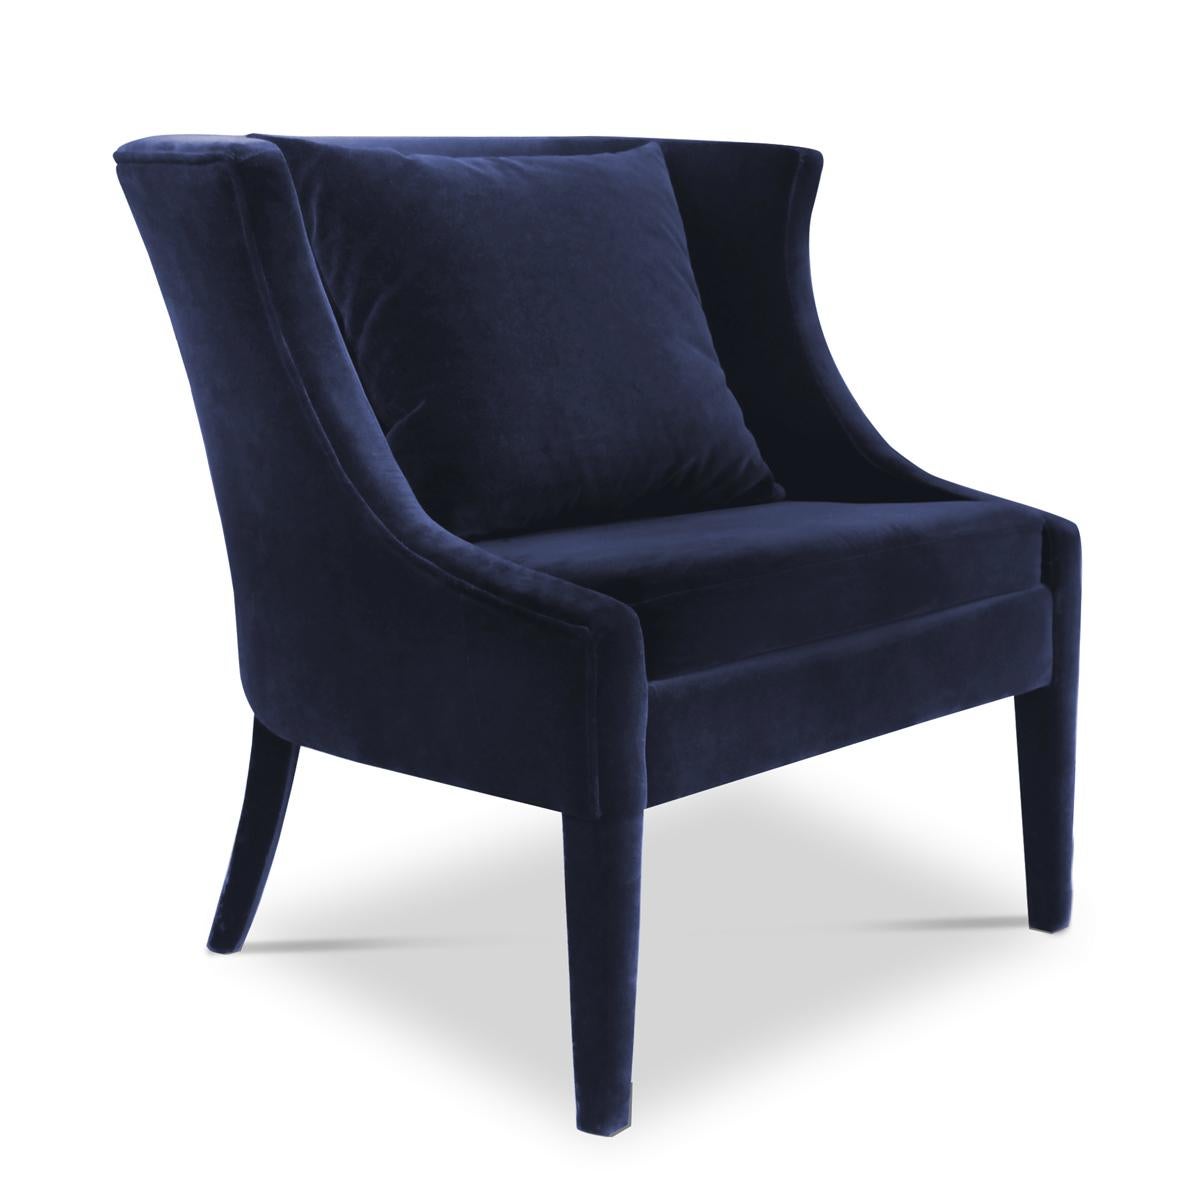 Armchair hornet with structure in solid wood and
covered with deep blue velvet fabric. Fully upholstered.
With 1 back cushion included.
Also available with other fabrics on request.